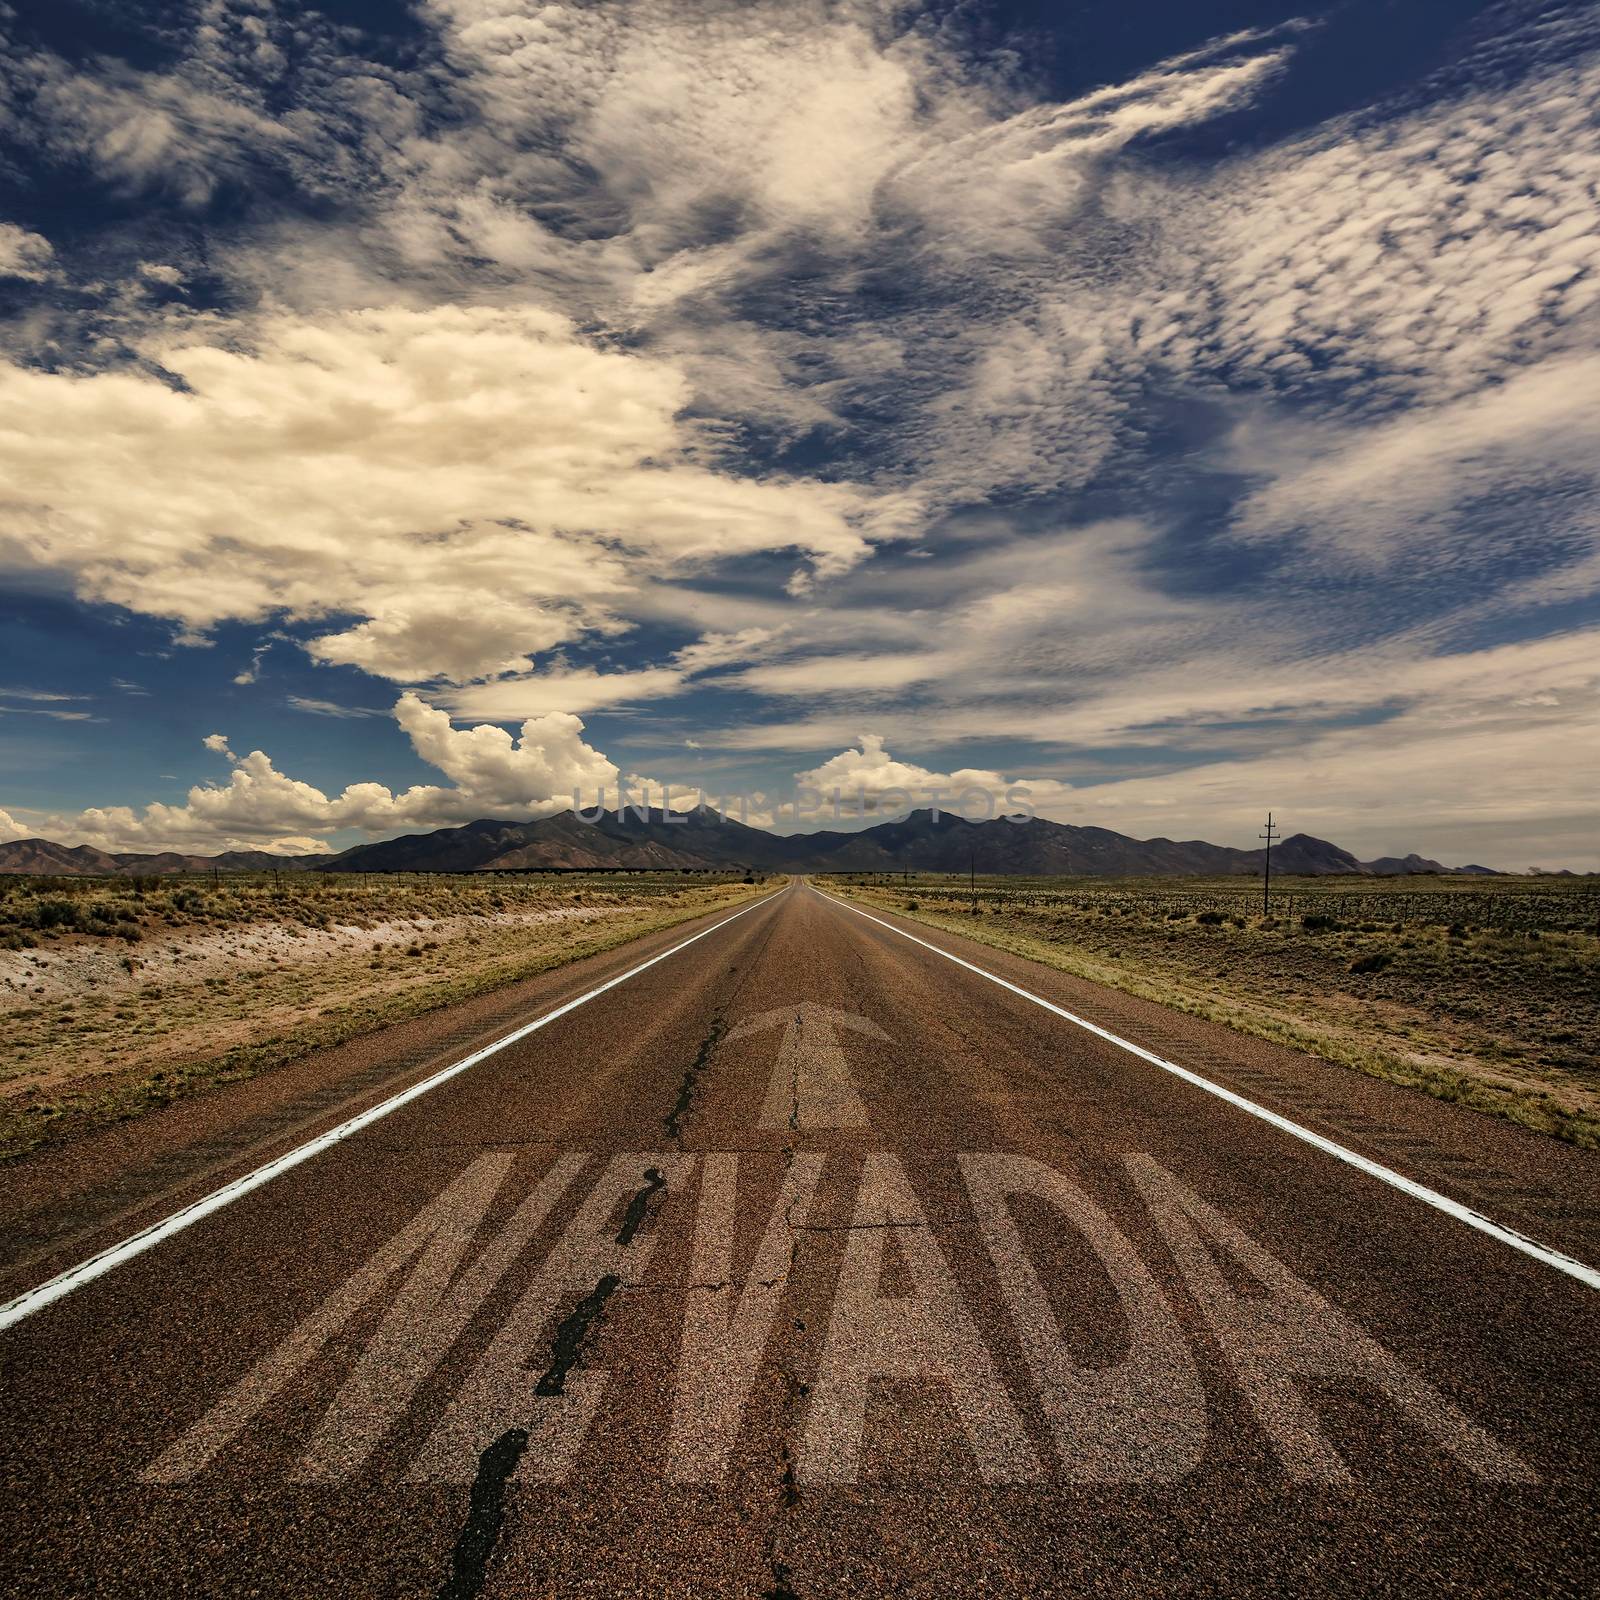 Conceptual image of desert road with the word Nevada